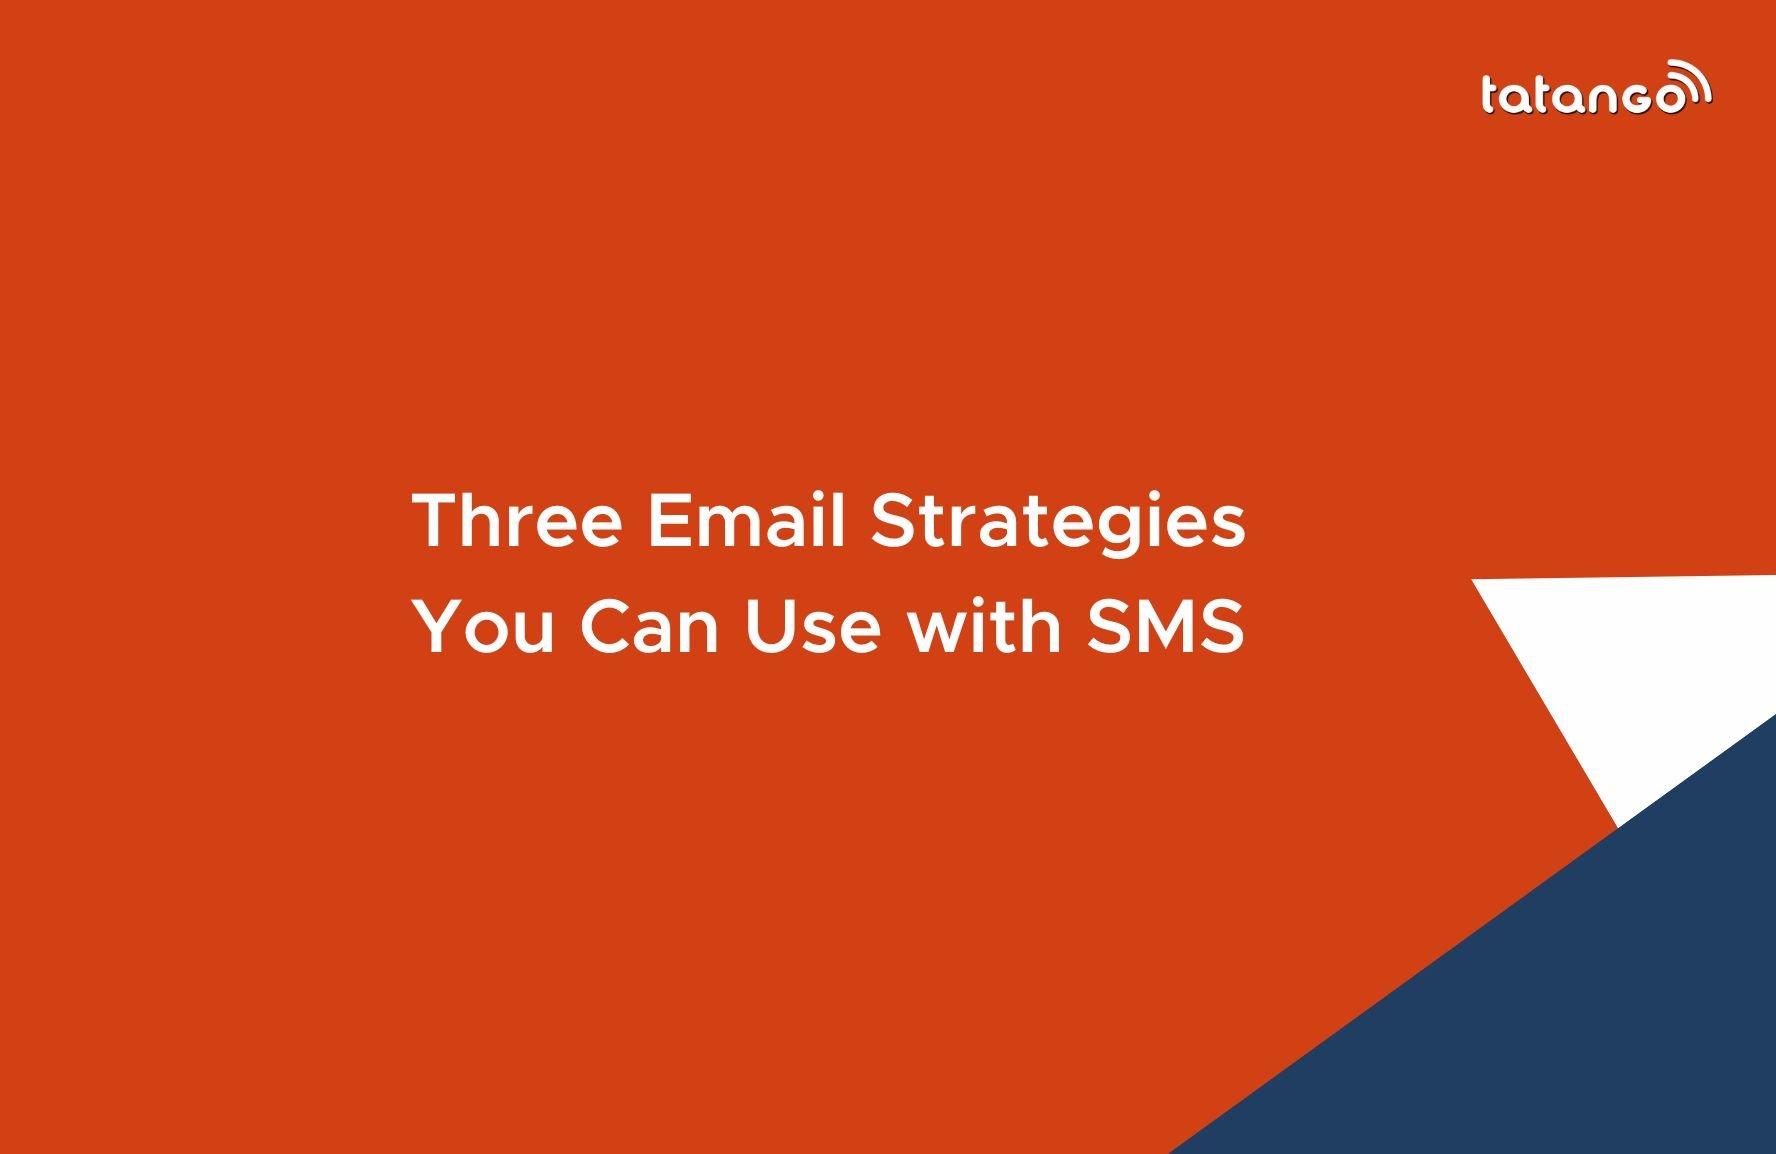 Three Email Strategies You Can Use with SMS